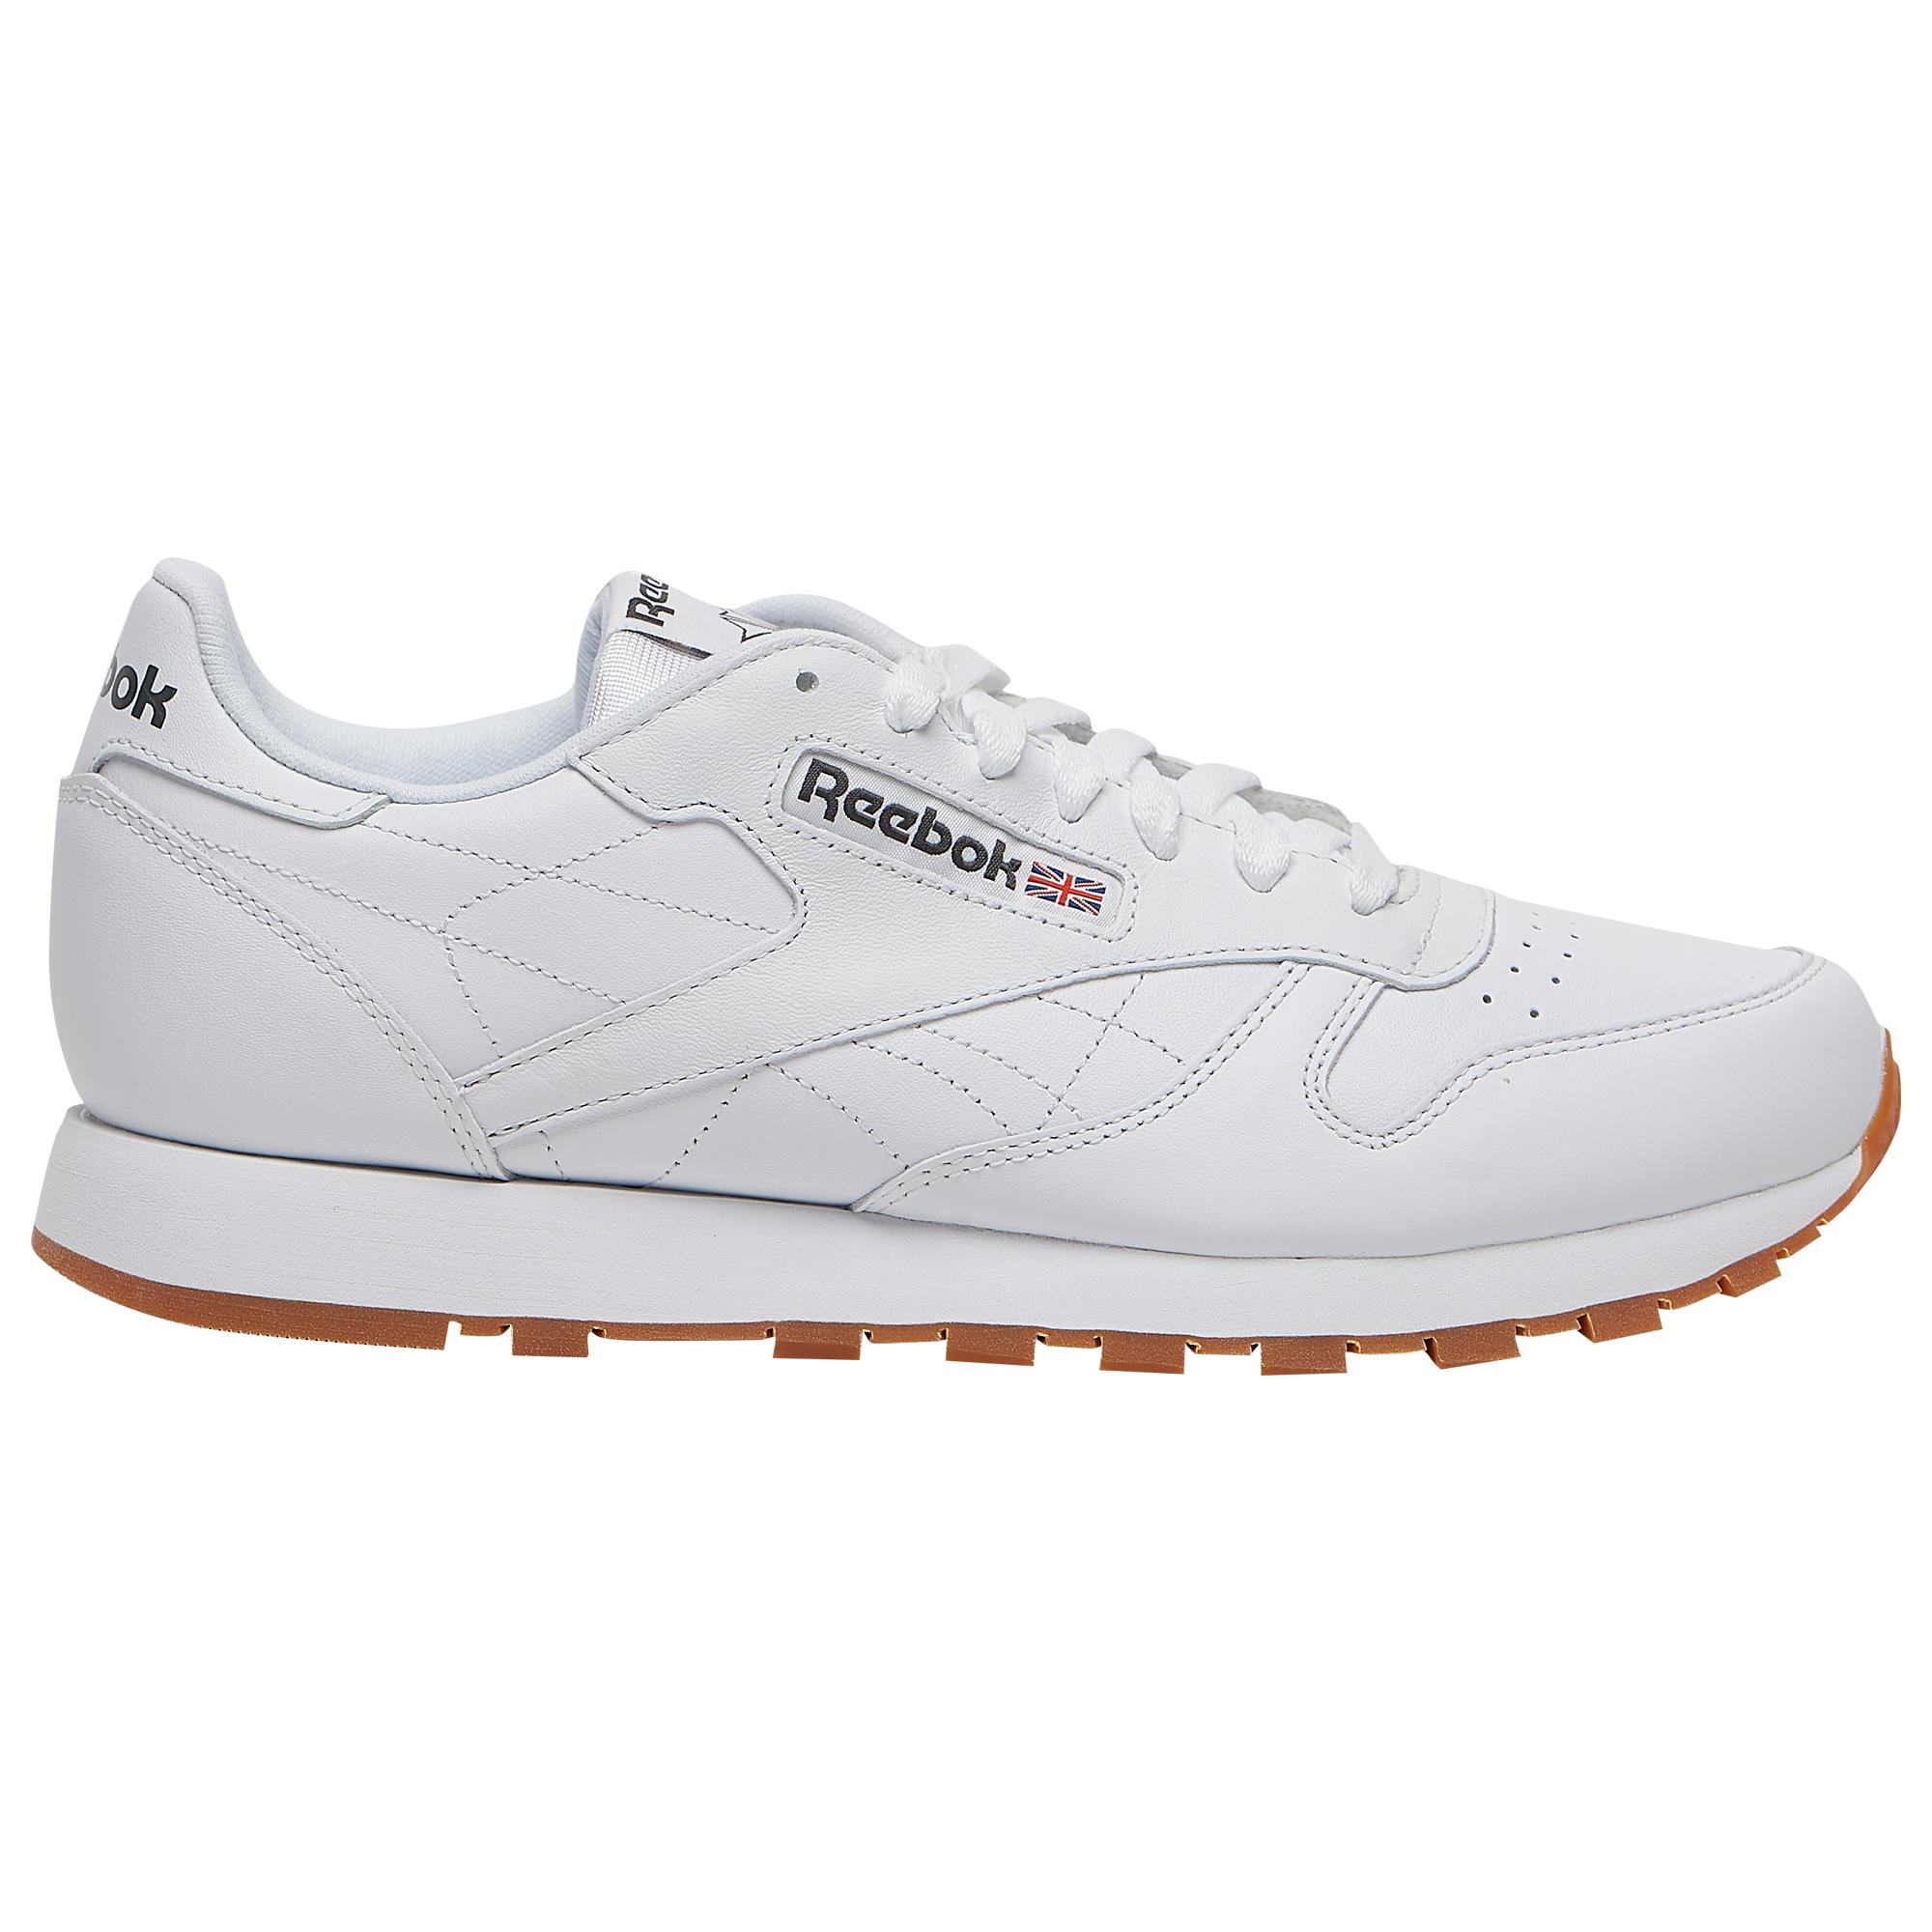 Reebok Classic Leather Running Shoes in White for Men - Lyst